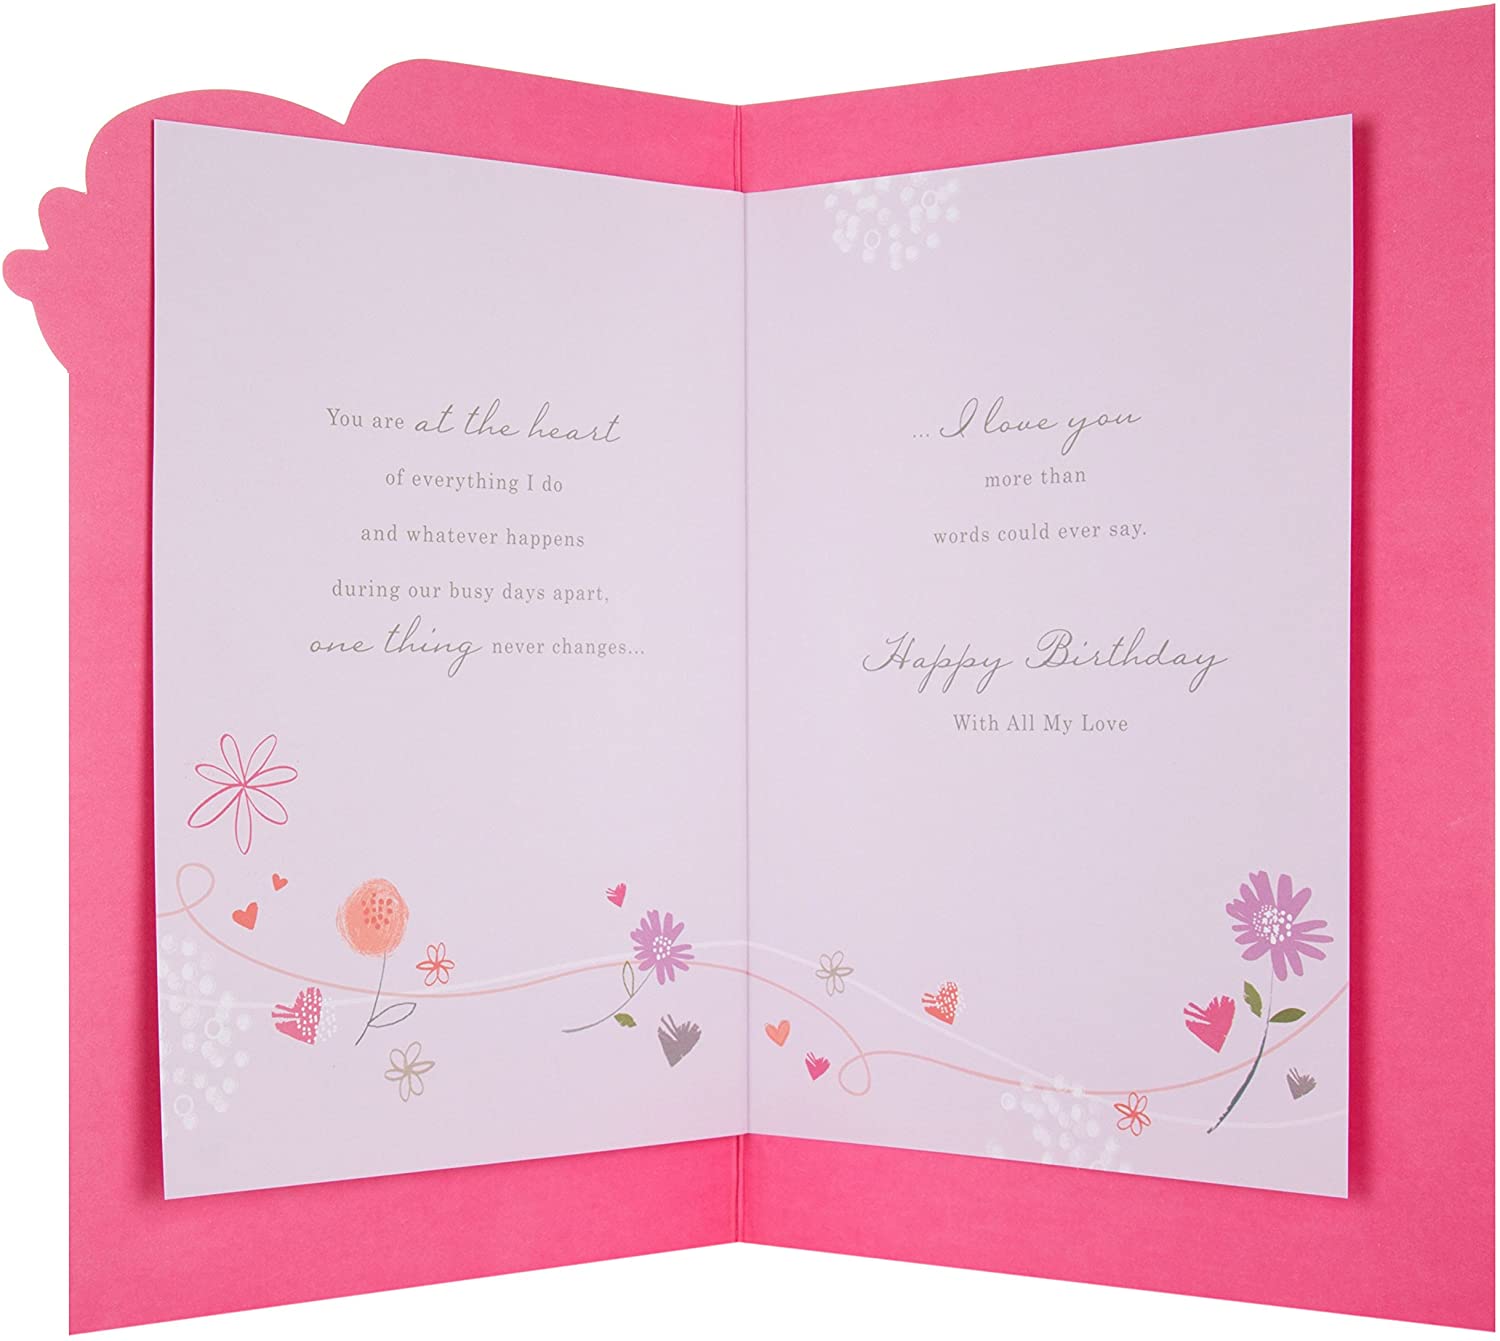 Wife Birthday Card - Love Blossoms: A Heartfelt Reminder of Our Precious Connection